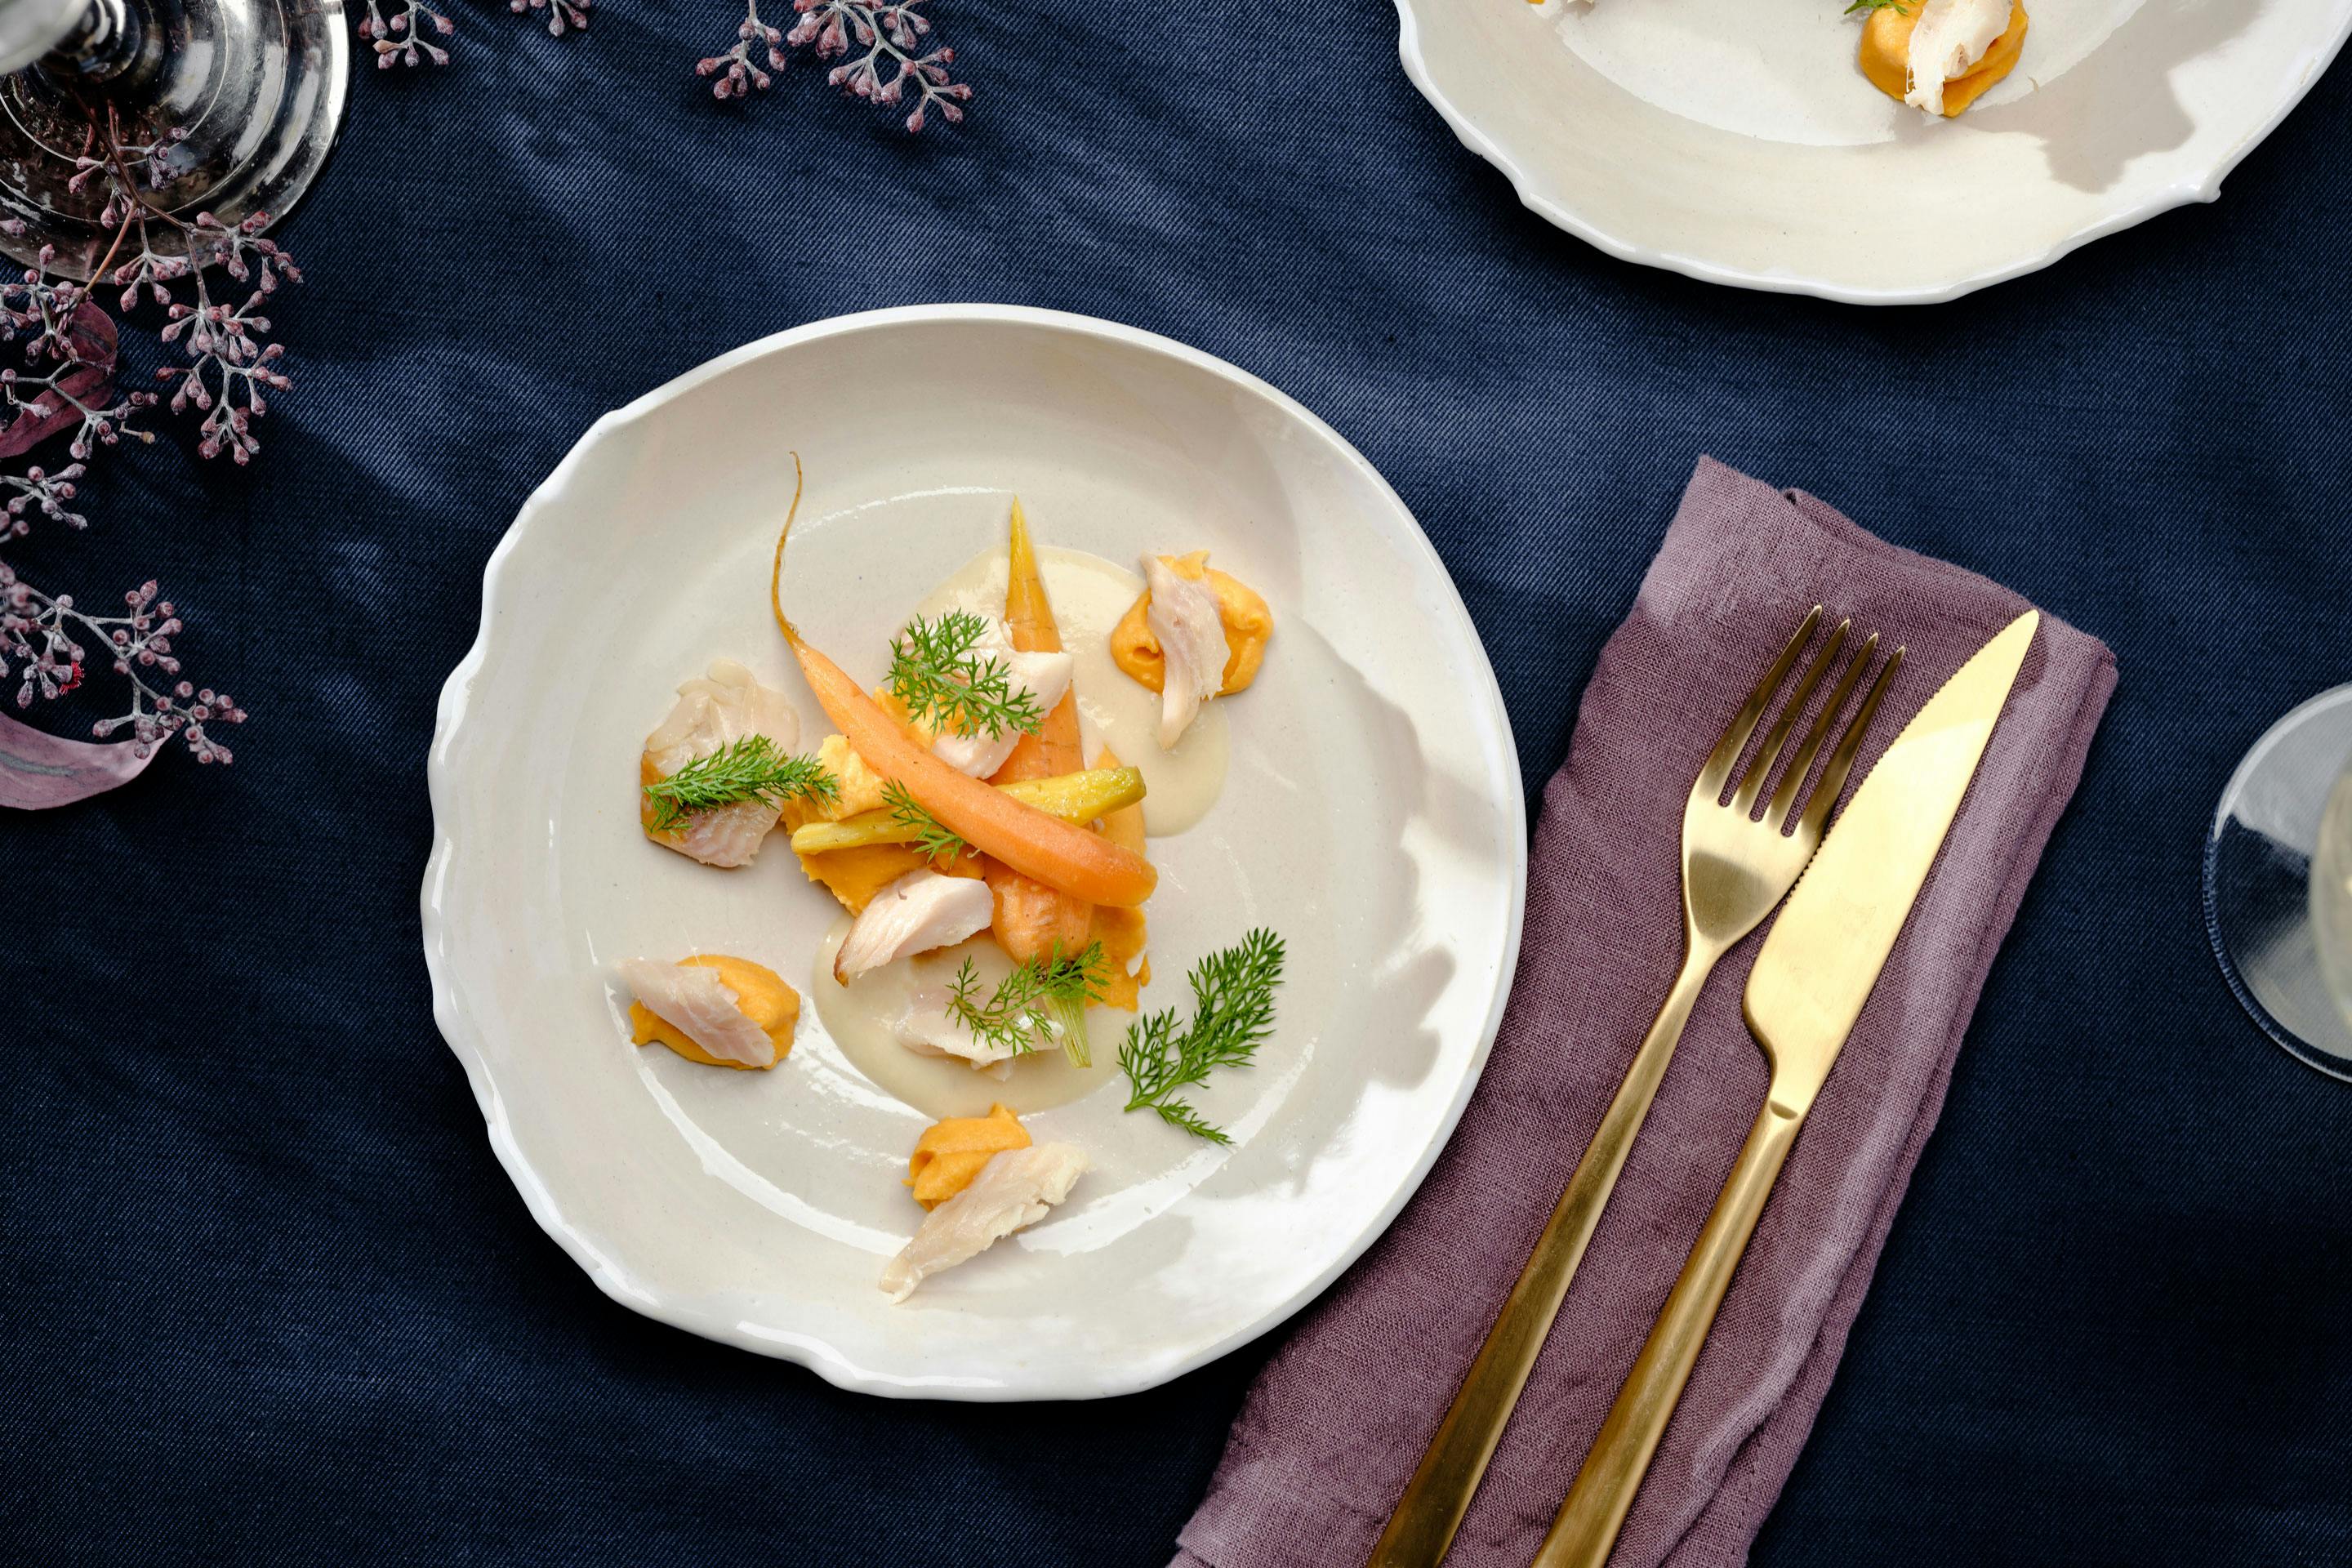 Two kinds of field carrots with carrot puree and smoked trout fillet pieces on a cream-colored plate, arranged with golden cutlery on a dark blue tablecloth